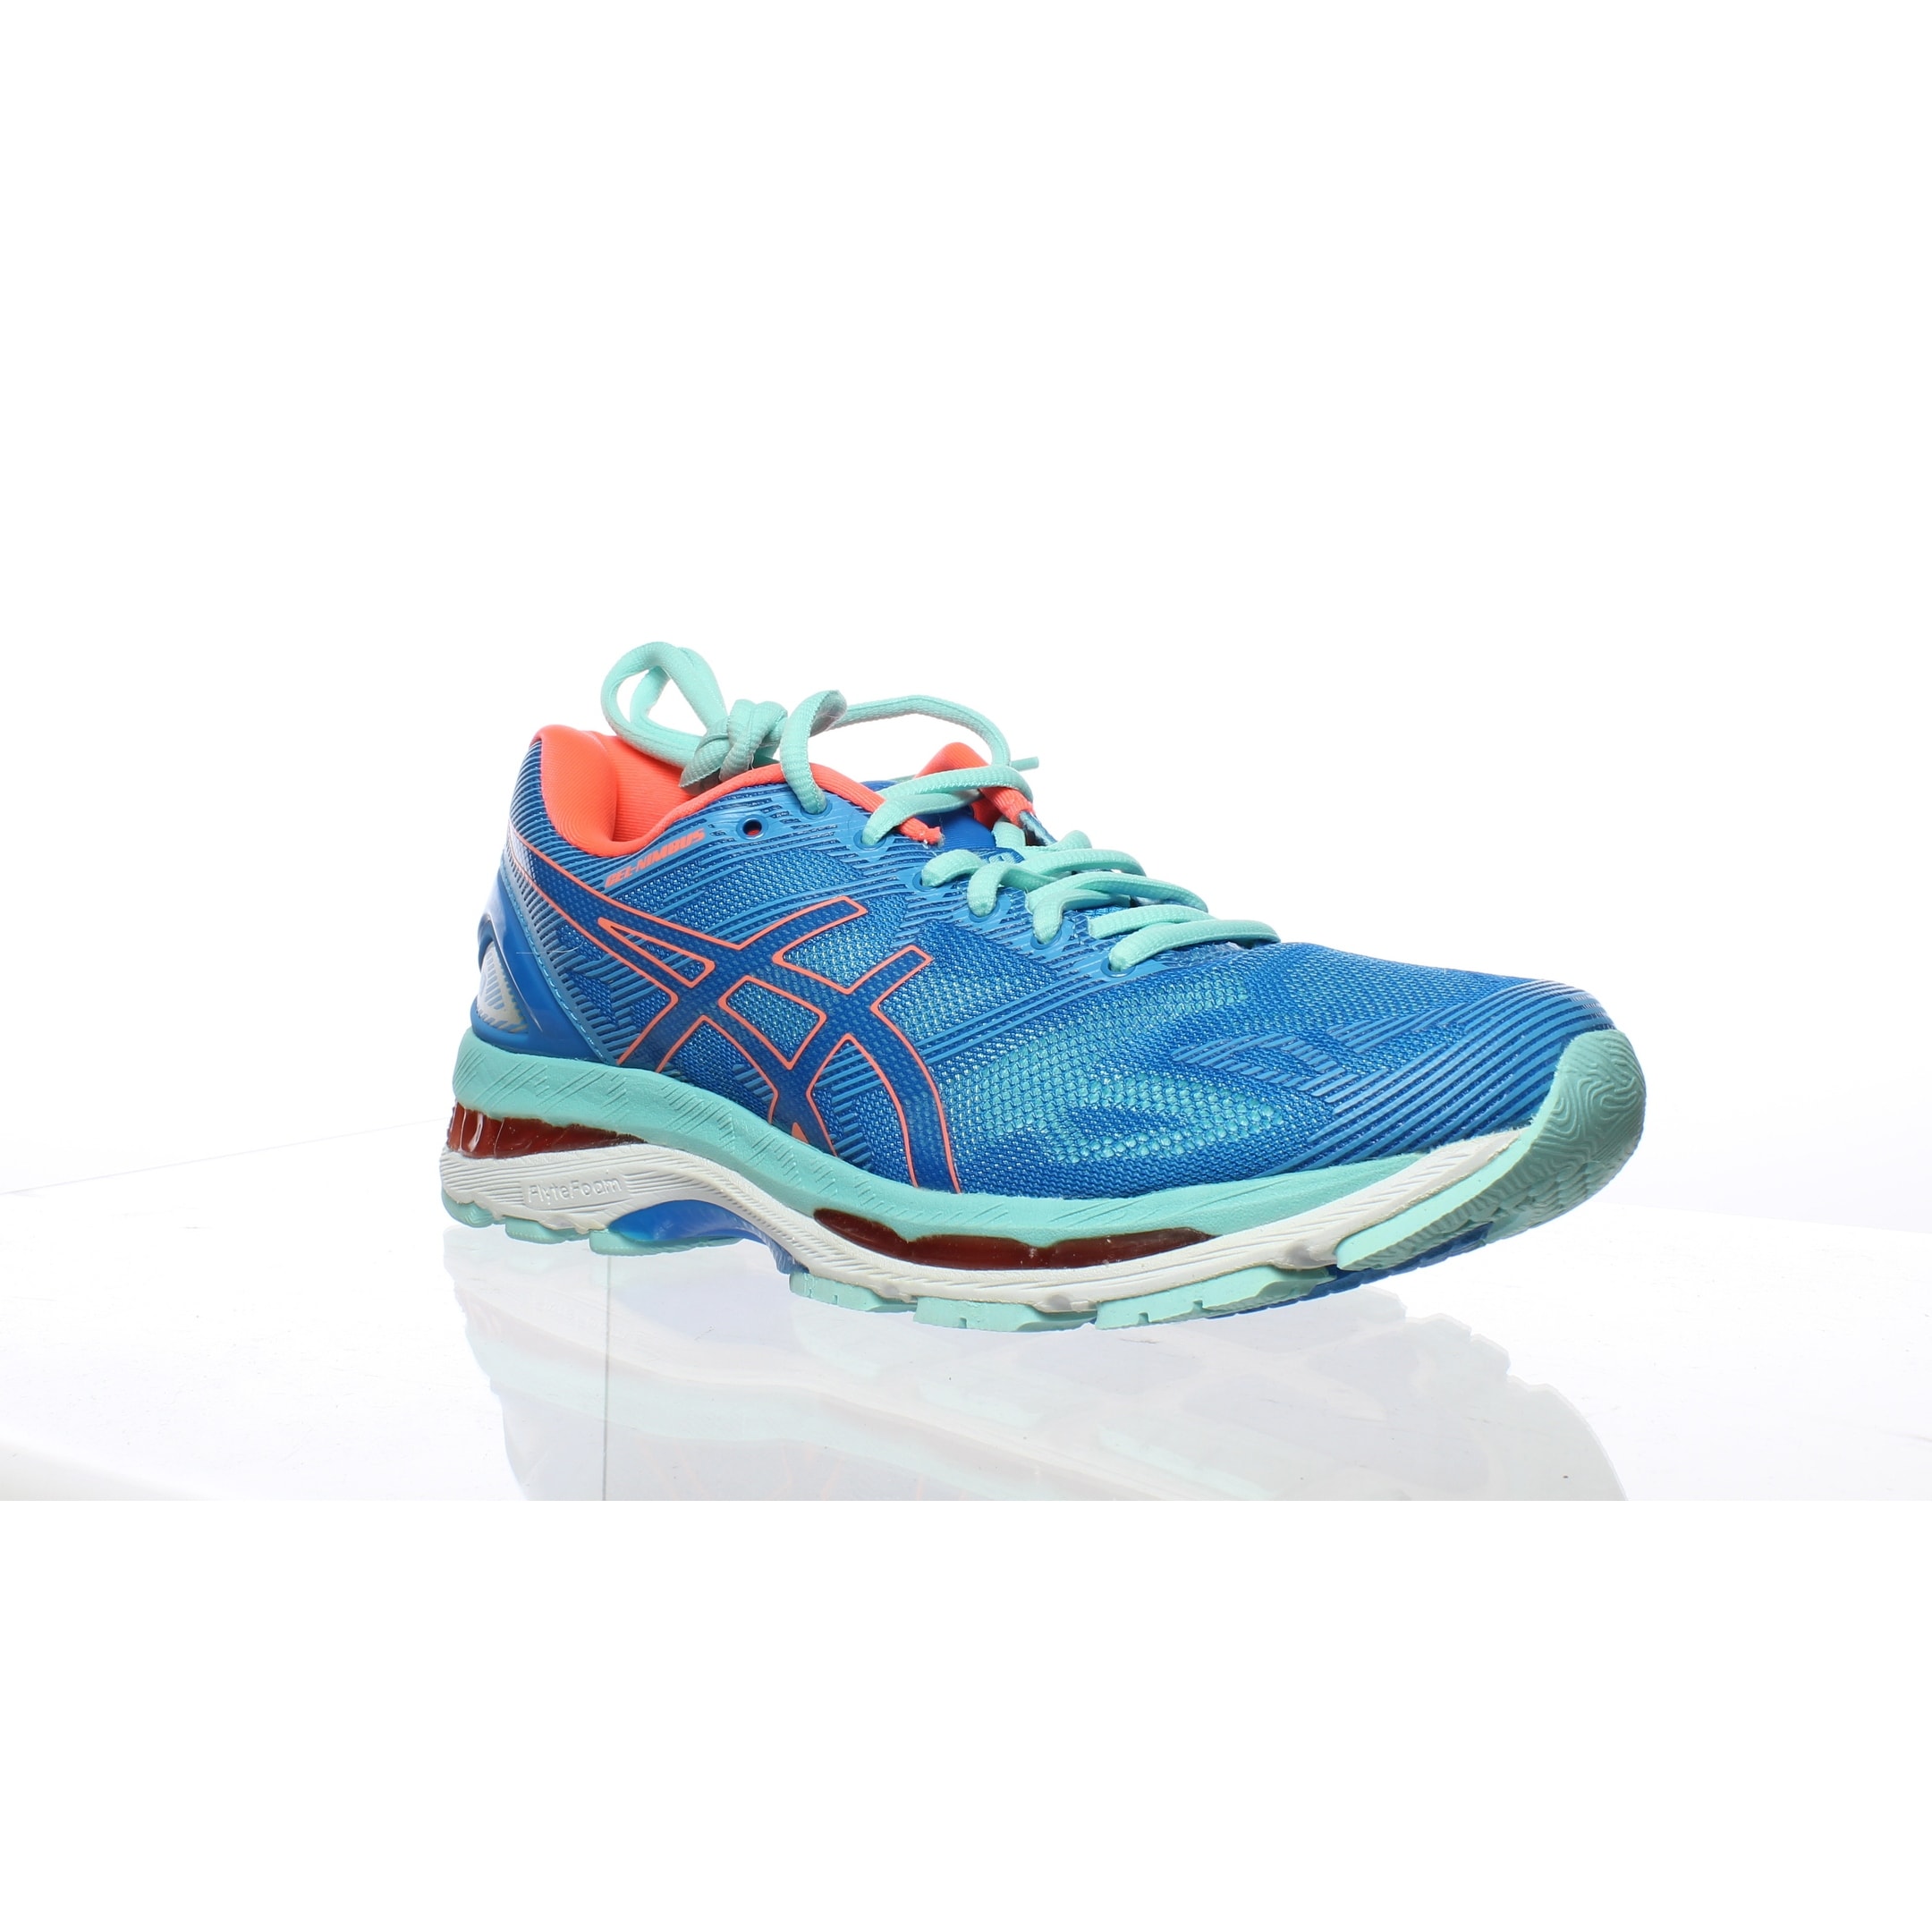 Shop ASICS Womens T751n.4306 Blue Running Shoes Size 8 (C,D,W) - Overstock  - 25366994